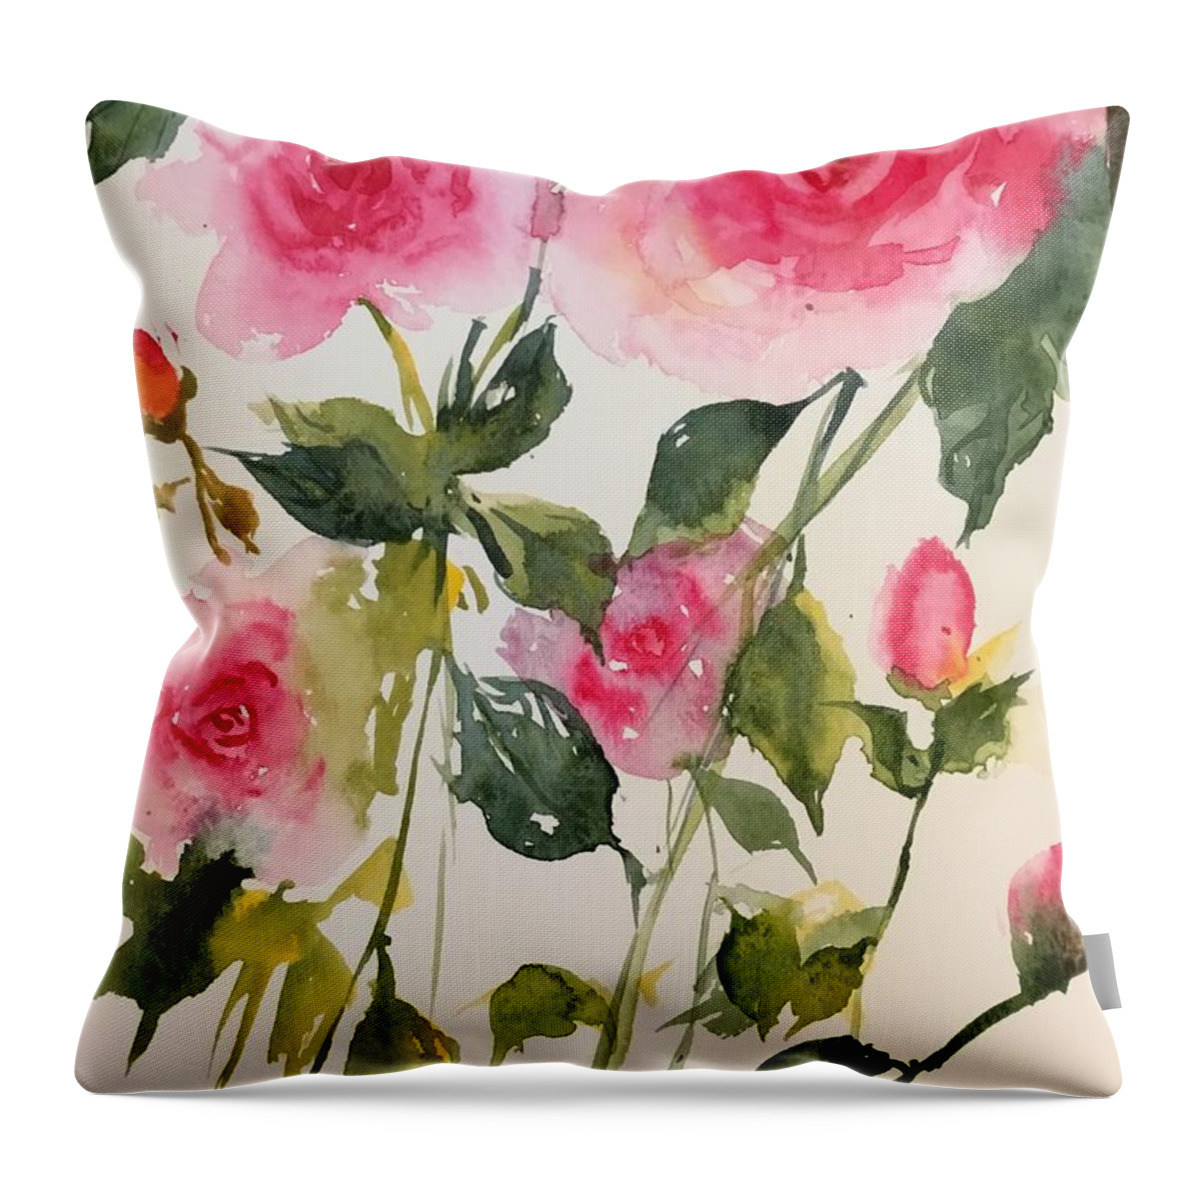 1892019 Throw Pillow featuring the painting 1892019 by Han in Huang wong